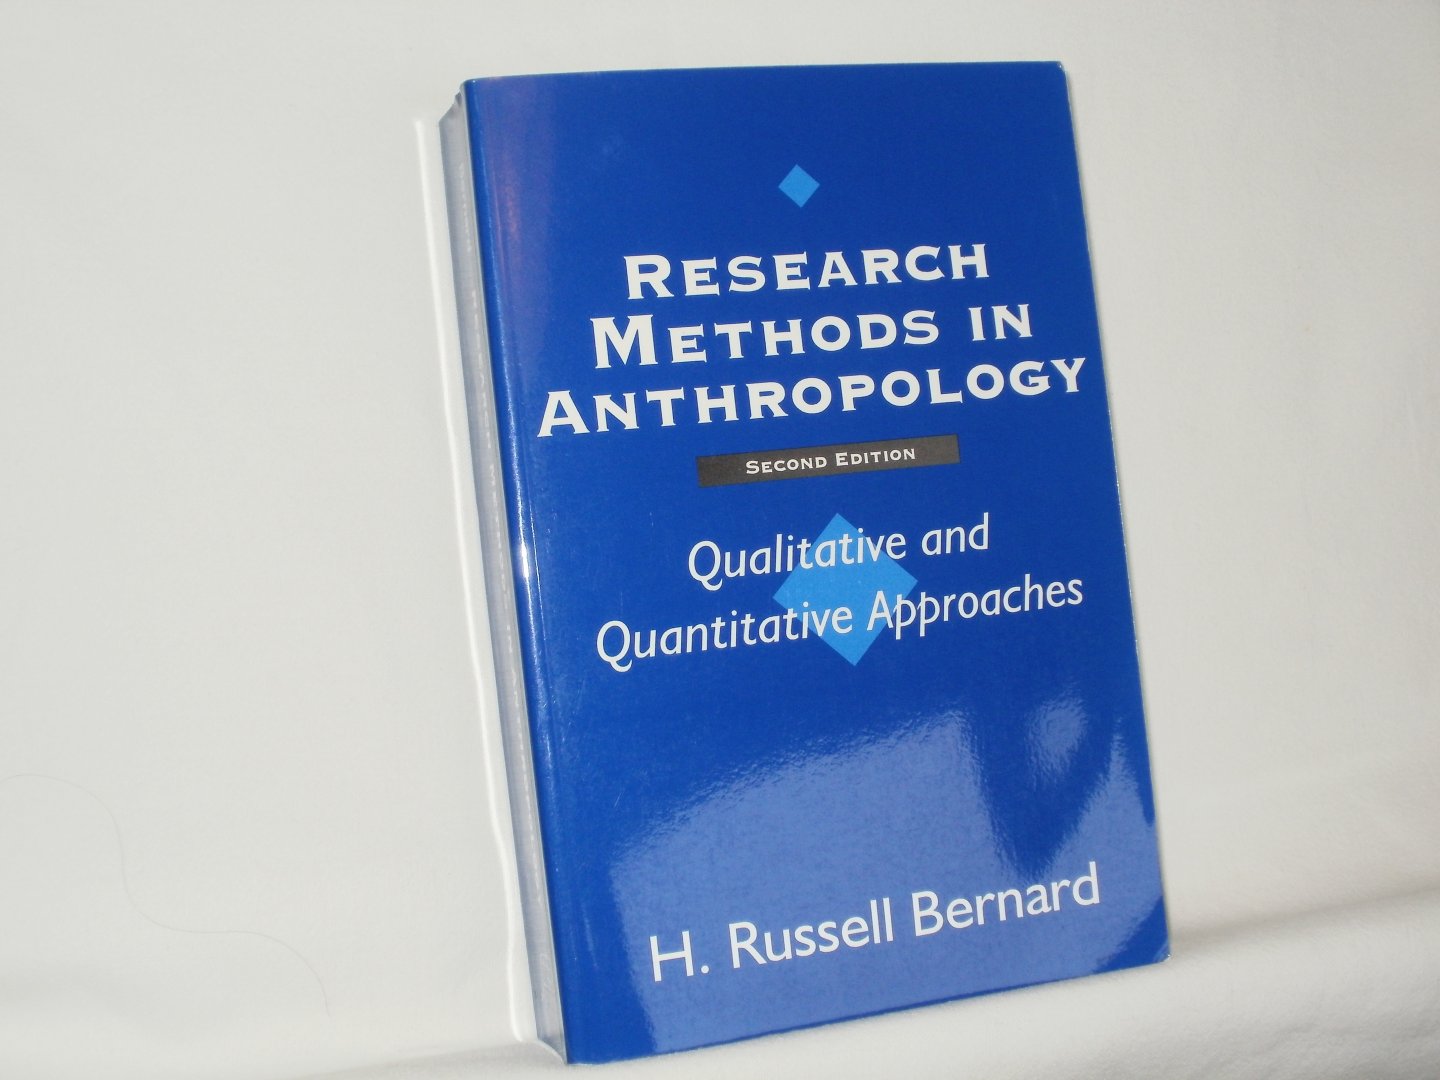 Bernard, H. Russell - Research Methods in Anthropology, Qualitative and Quantitative Approaches.